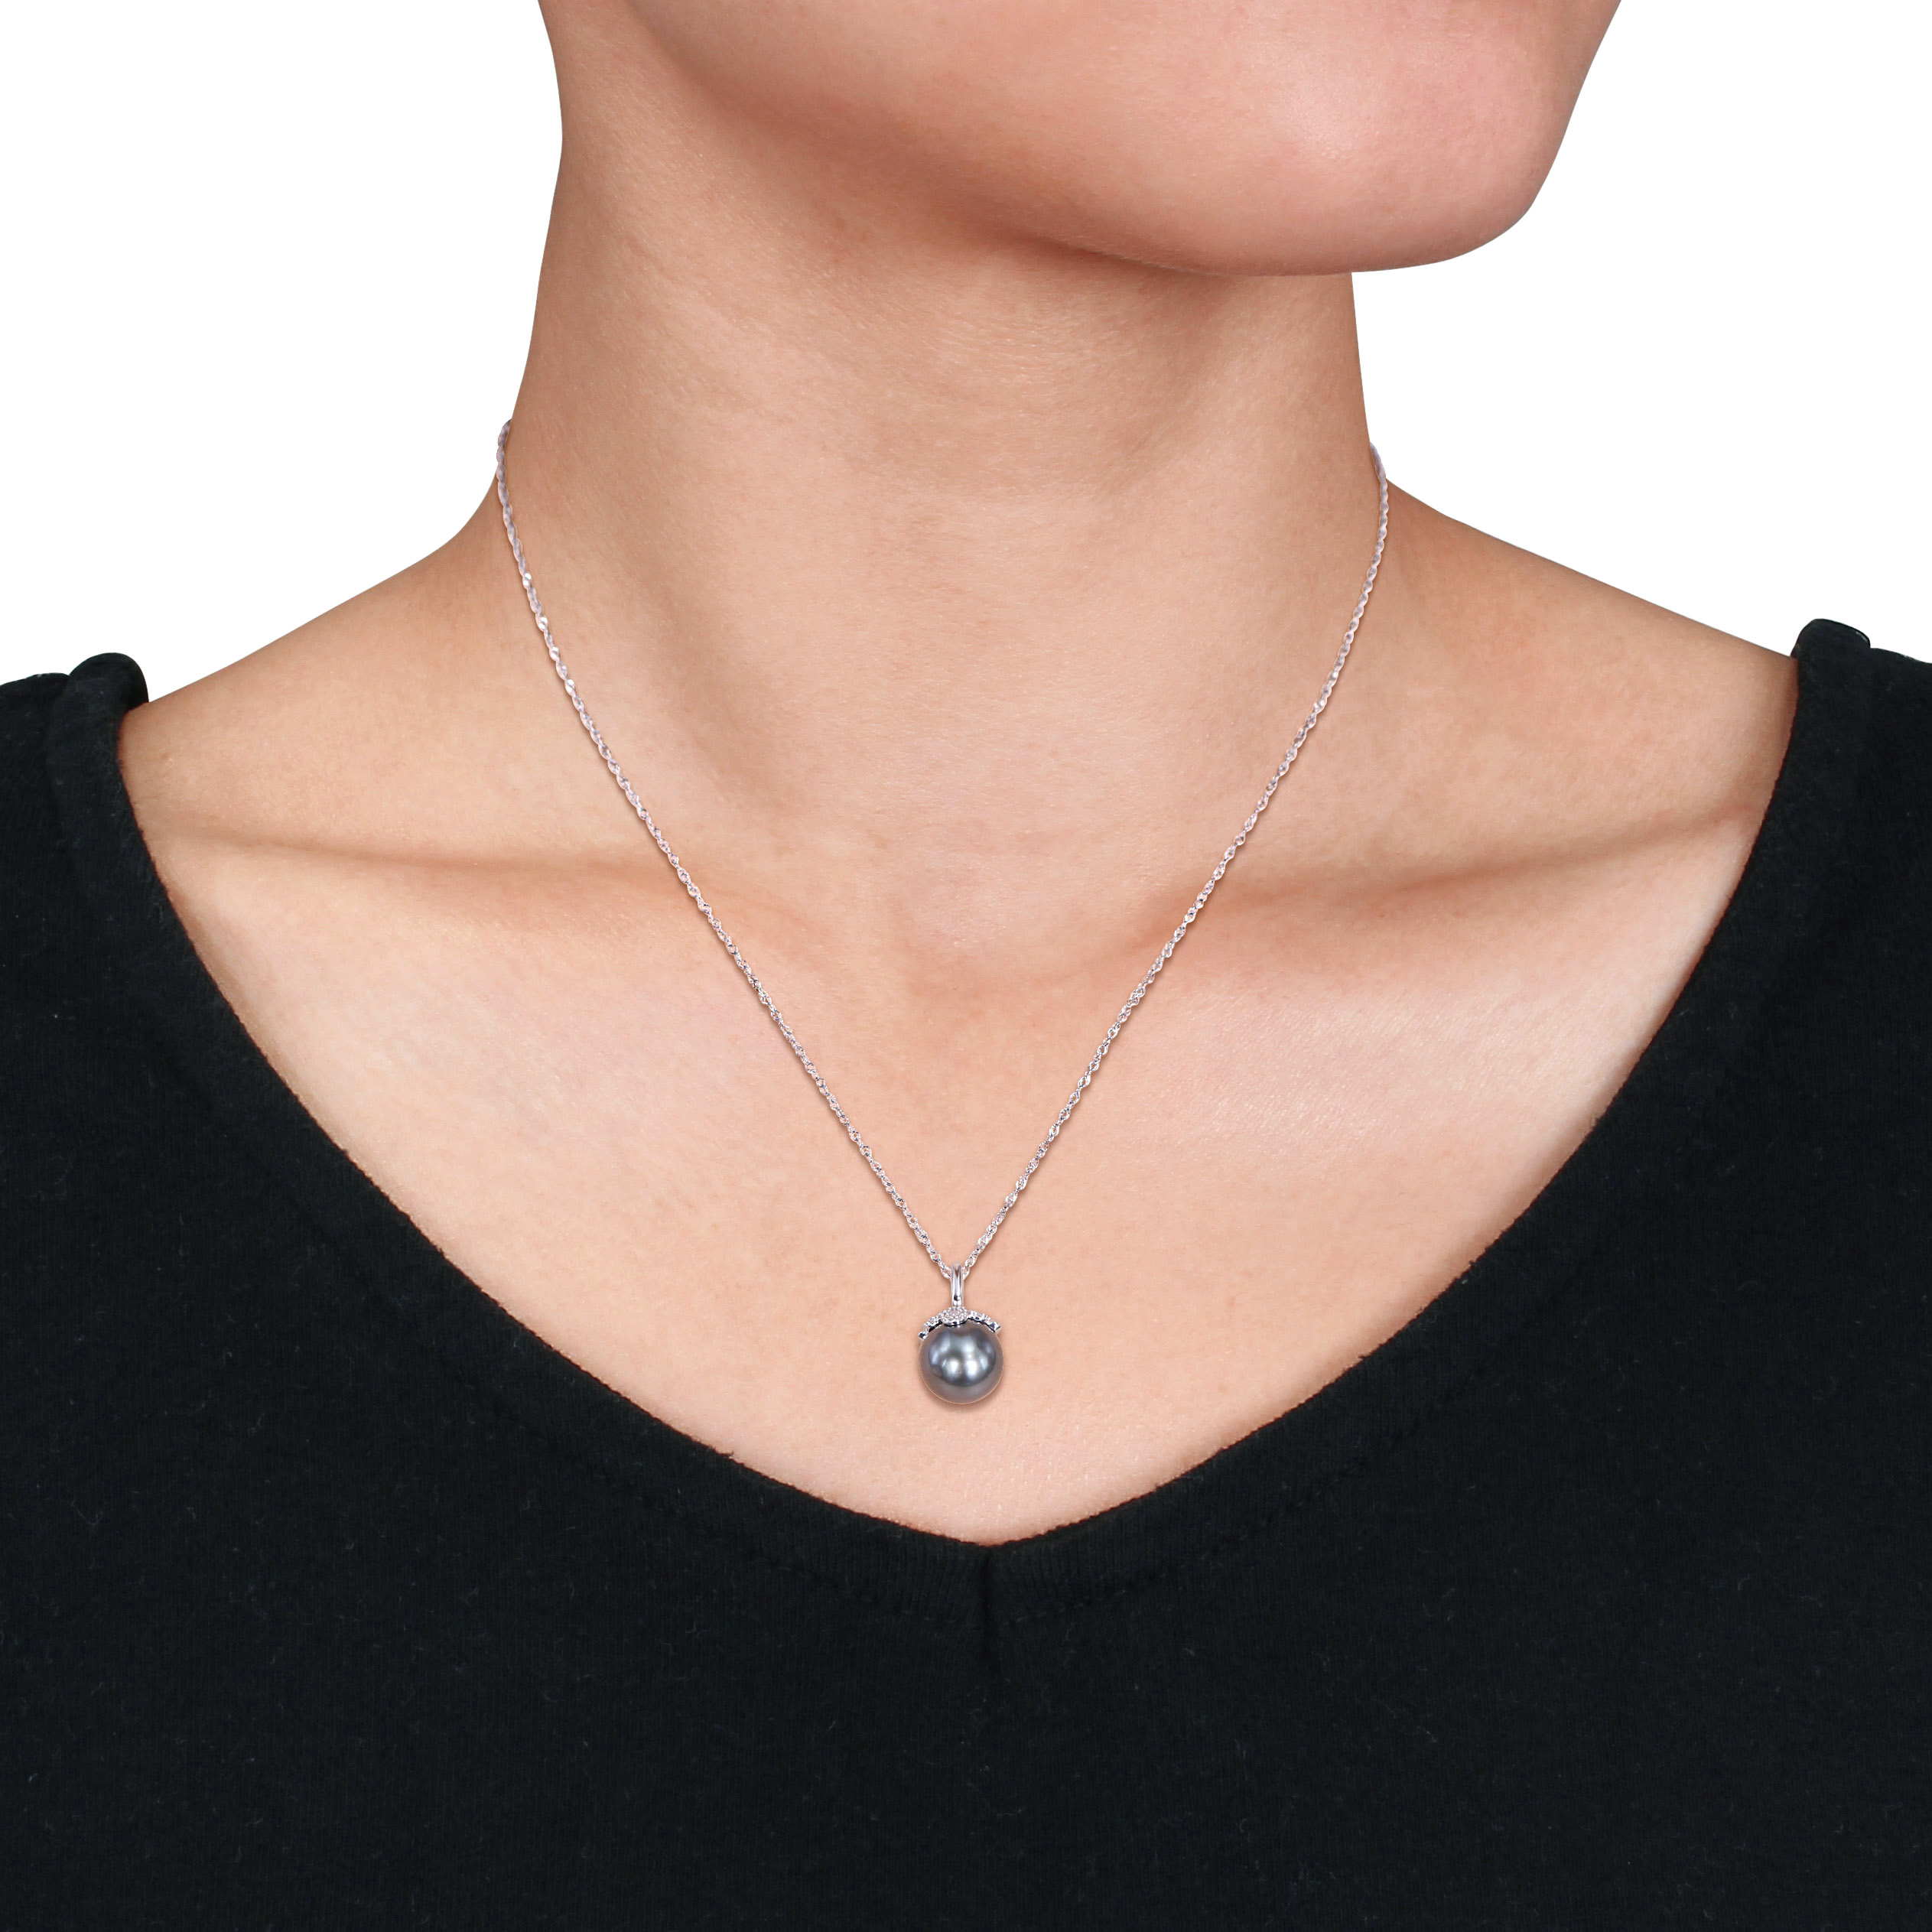 10-10.5 MM Black Tahitian Pearl and Diamond Accent Pendant with Chain in 14k White Gold